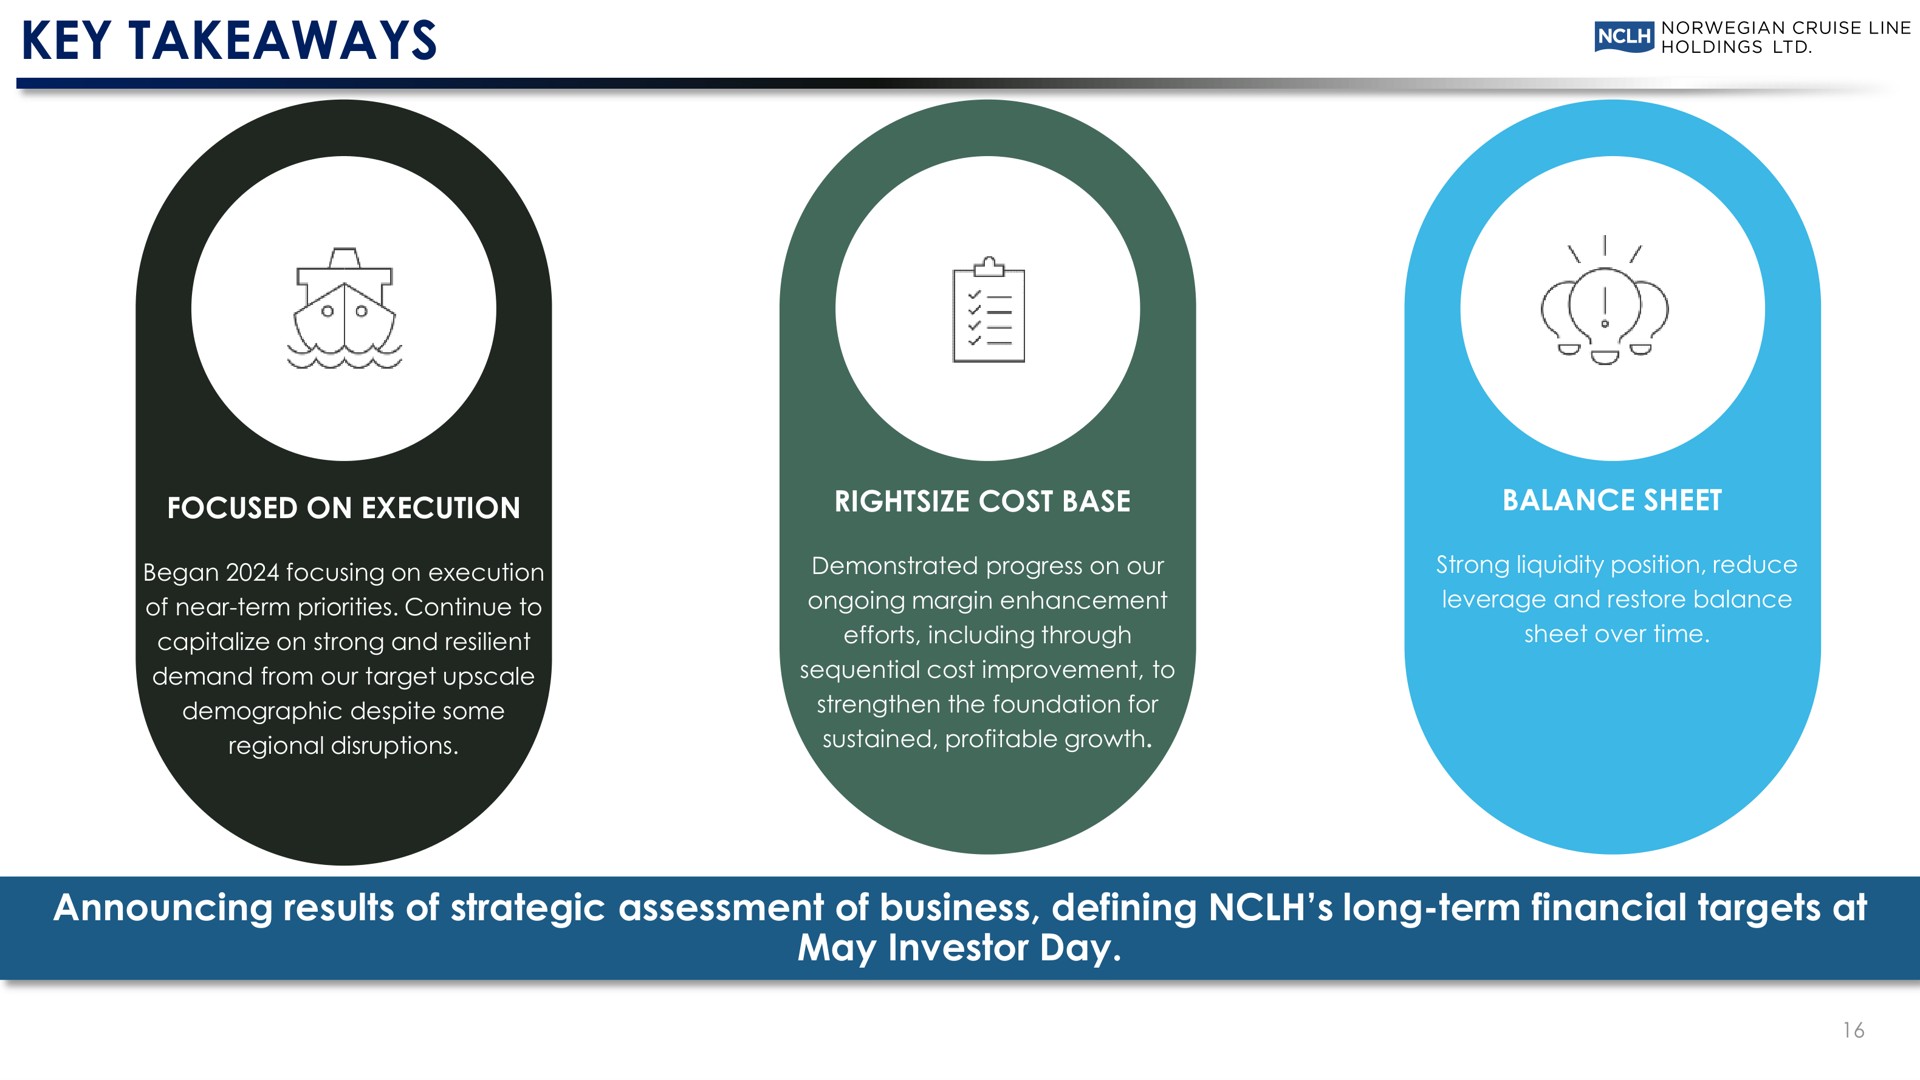 key announcing results of strategic assessment of business defining long term financial targets at may investor day bad | Norwegian Cruise Line